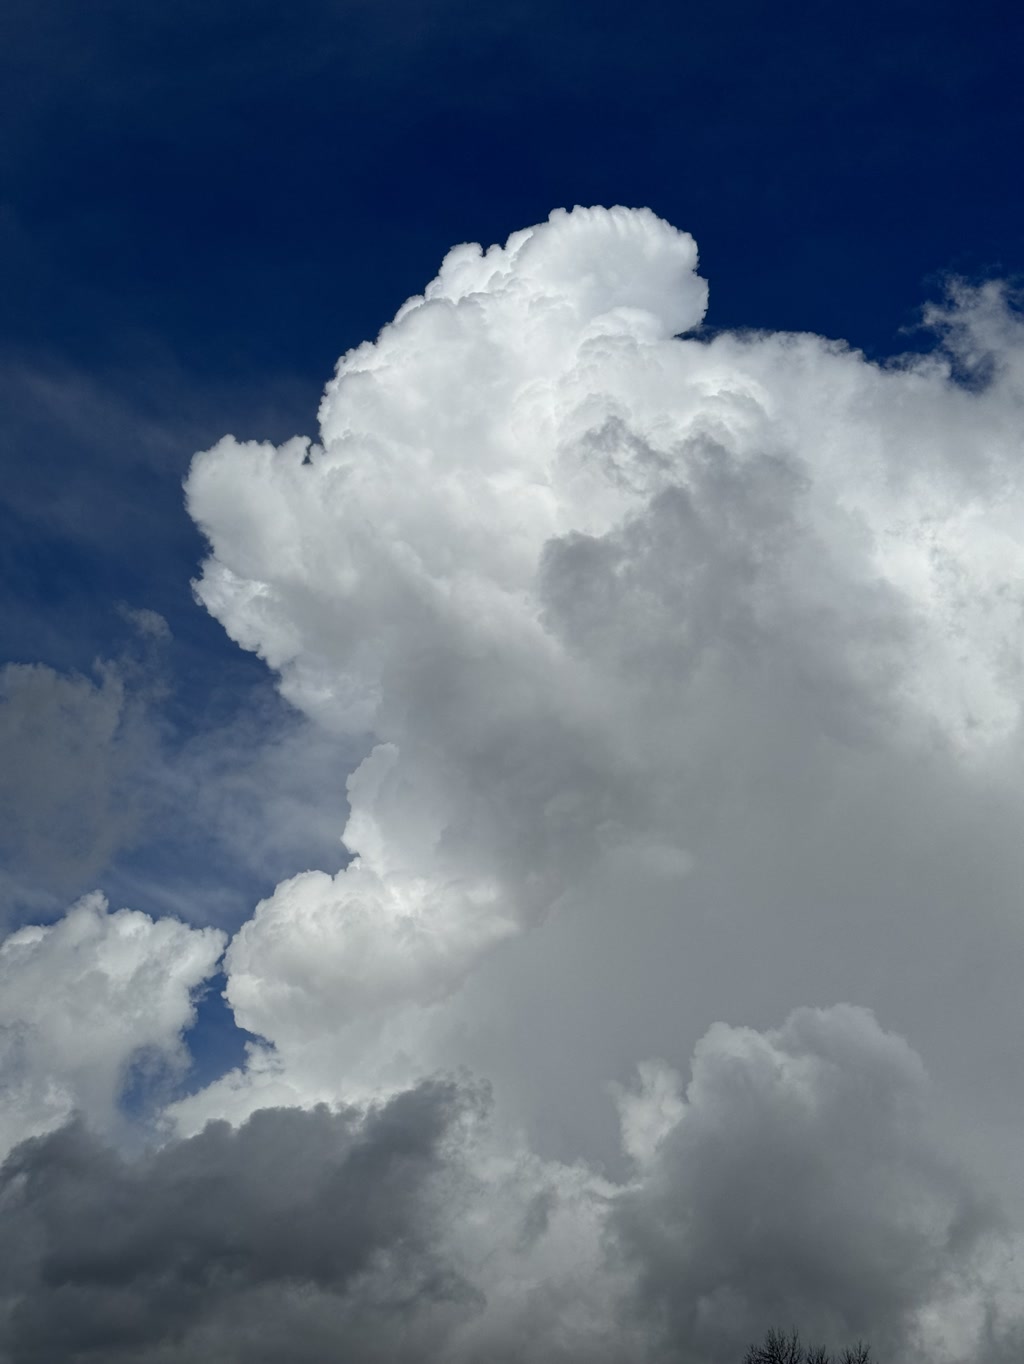 A towering cumulus cloud dominates the scene, with its intense white peaks rising high above against a backdrop of deep blue sky. The cloud formation displays a powerful vertical development, indicating a possible thermal updraft. Below and around the cumulus, there are patches of darker, smaller clouds, suggesting variability in the weather. The bottom edges of the clouds are gray, merging into the white fluffiness above, highlighted by the sunlight. There is a clear contrast between the bright whites of the cloud's body and the varying shades of blue and gray surrounding it. The scene evokes a sense of majesty and the dynamic nature of the atmosphere.